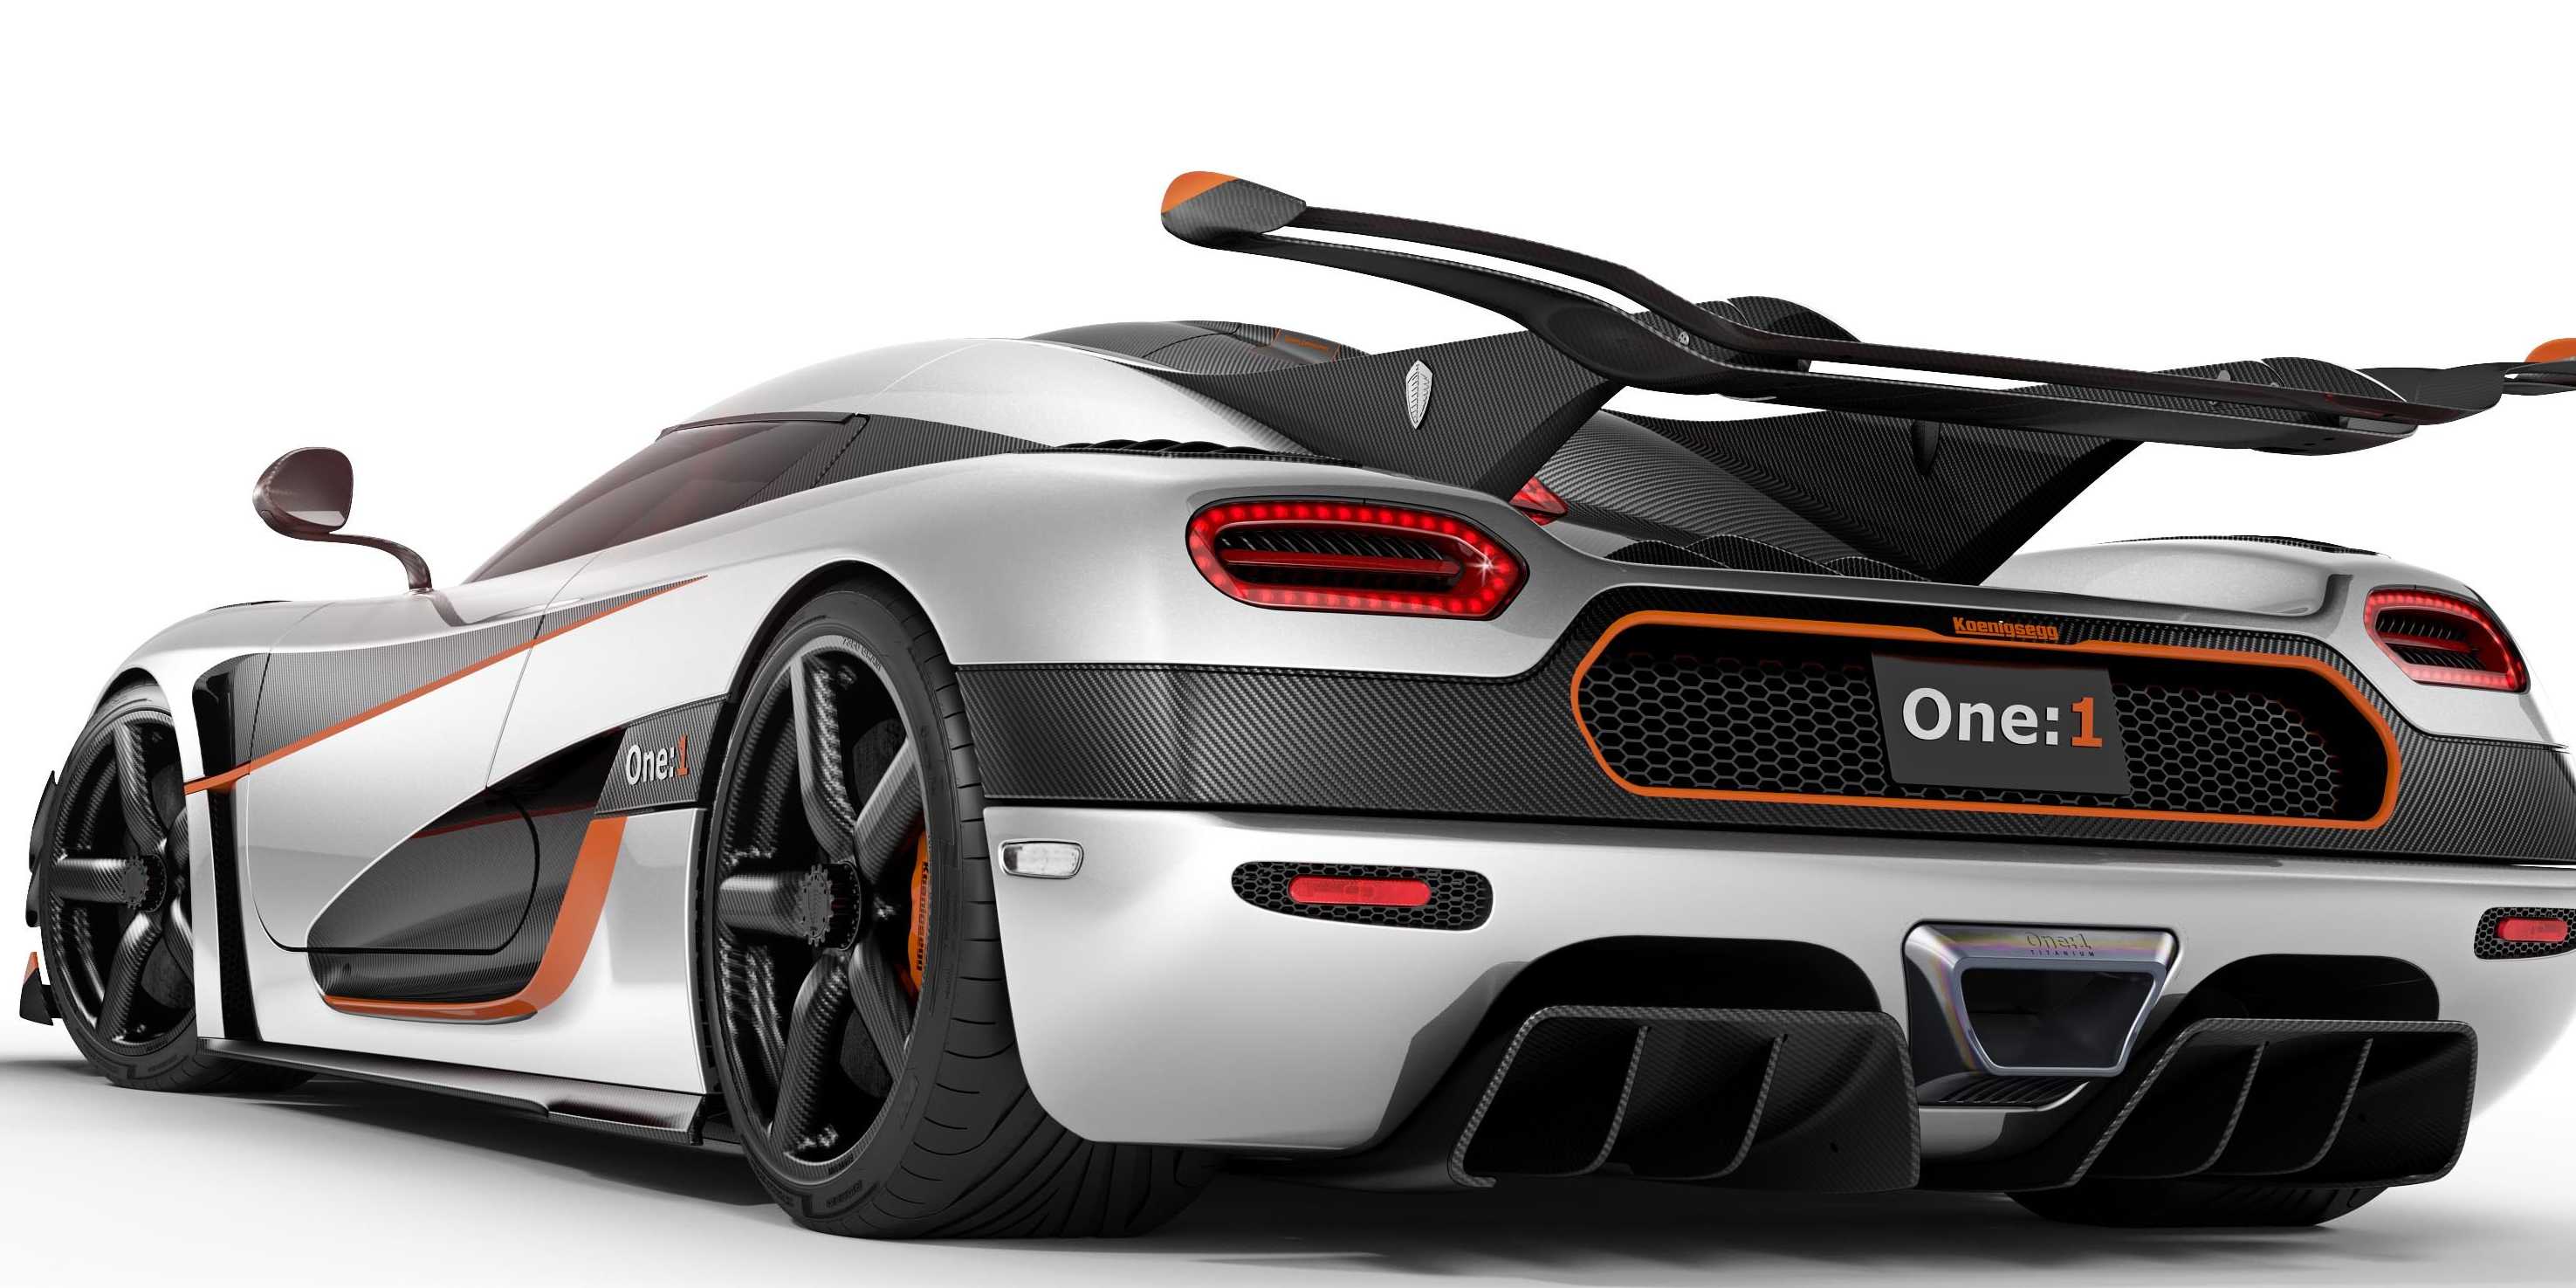 HD image of cars in the world / Wallpaper Database